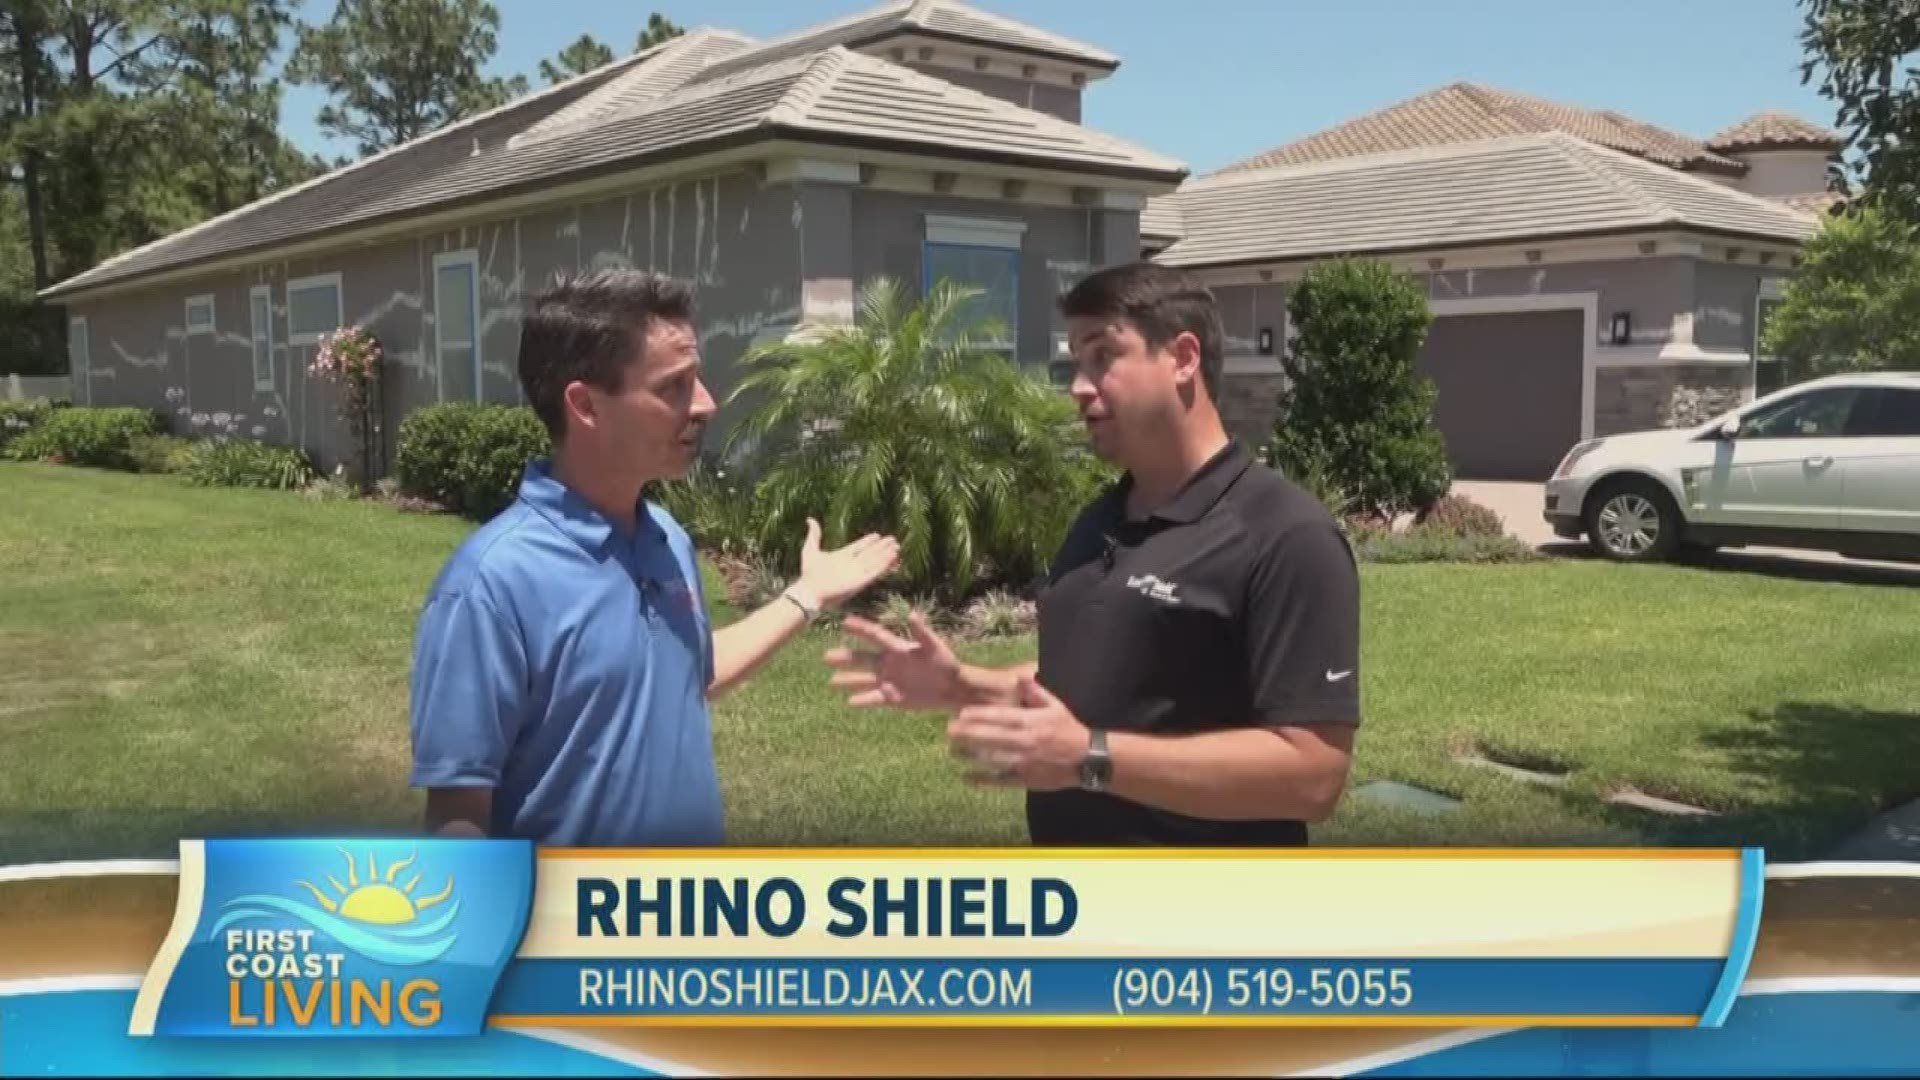 Jay Mariano with Rhino Shield says their product offers many benefits.